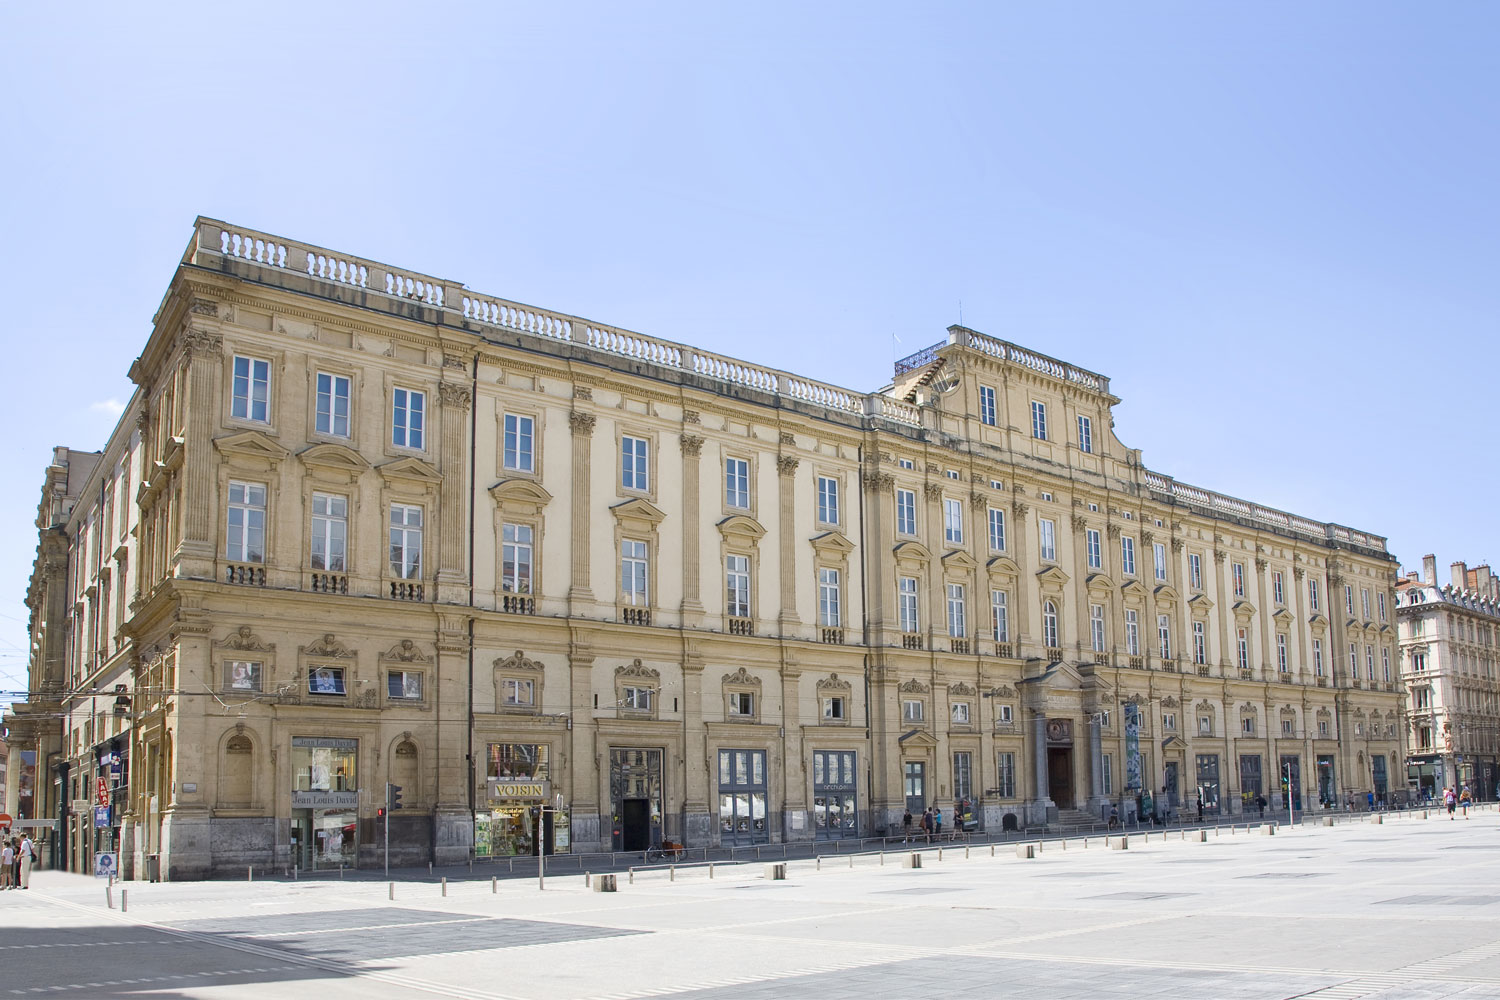 The Museum of Fine Arts of Lyon